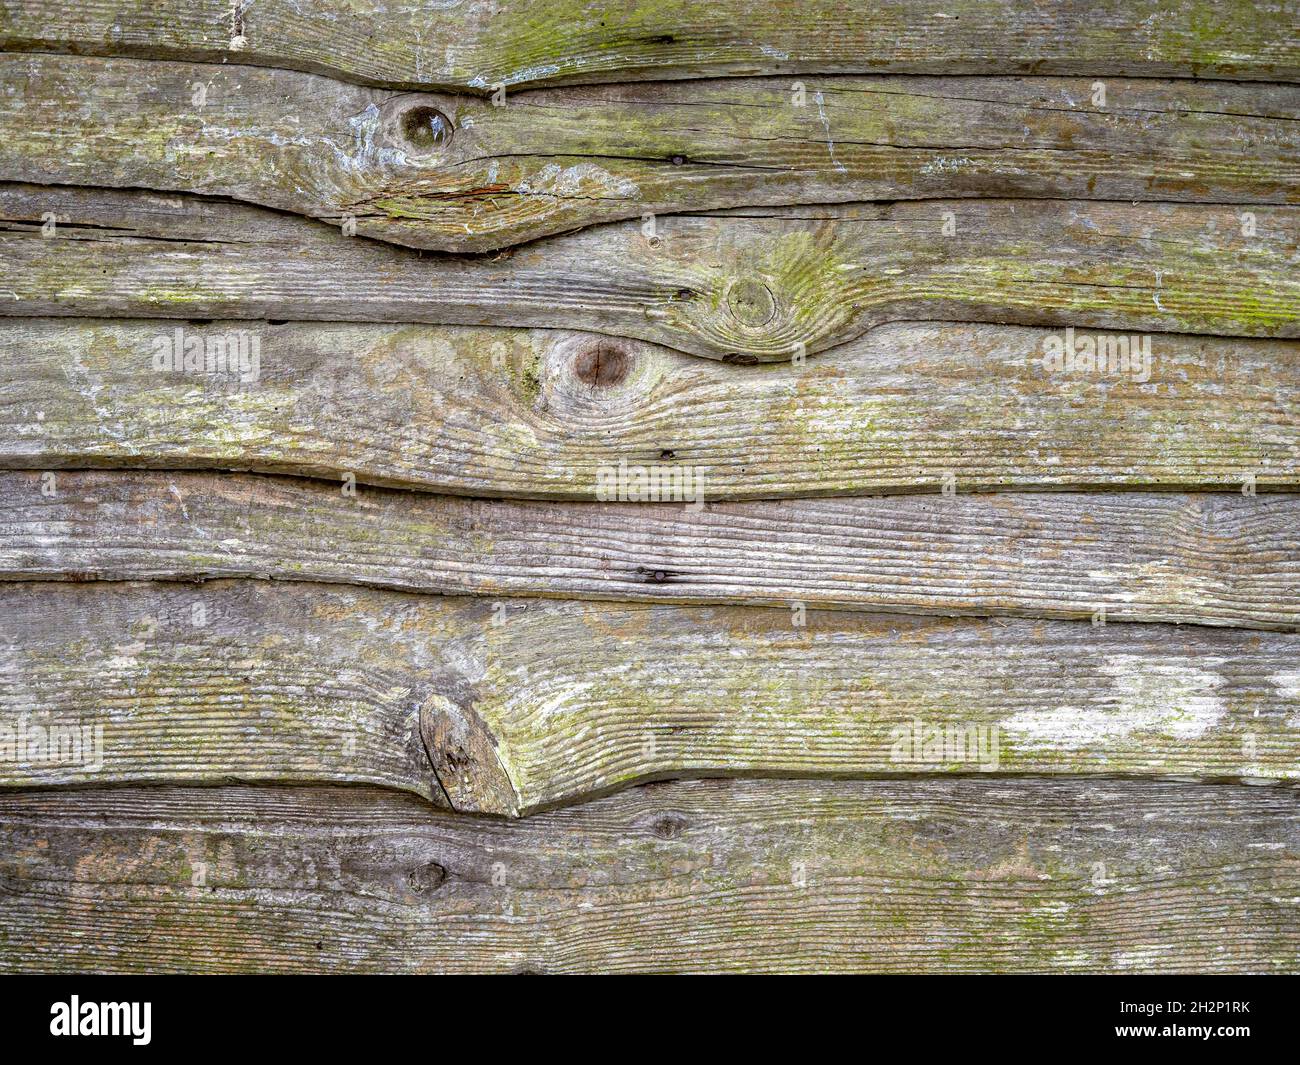 Wood slats on an old mouldy garden fence Stock Photo